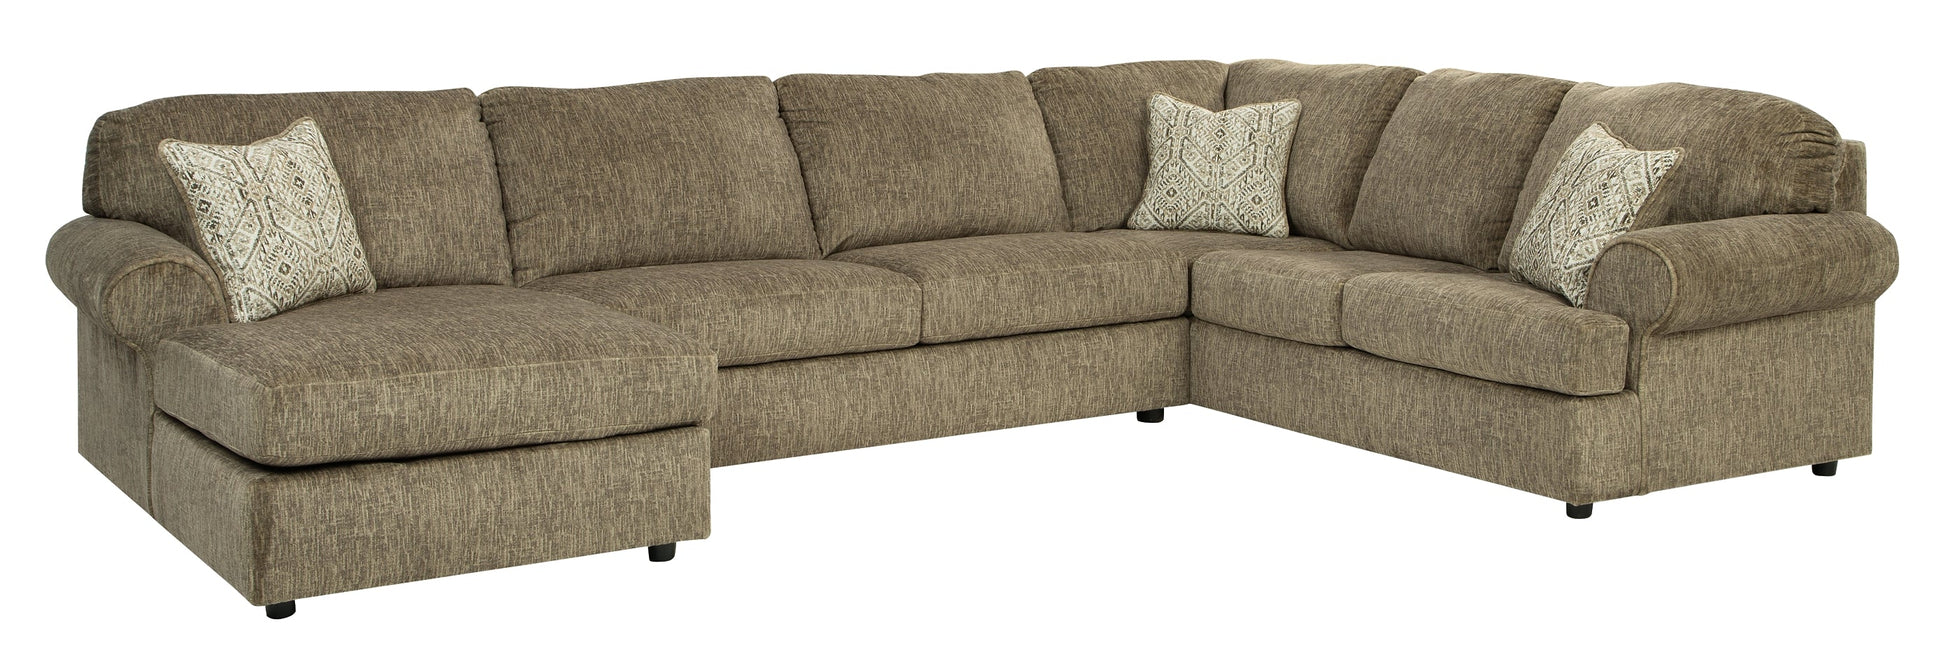 Hoylake 3-Piece Sectional with Ottoman Rent Wise Rent To Own Jacksonville, Florida